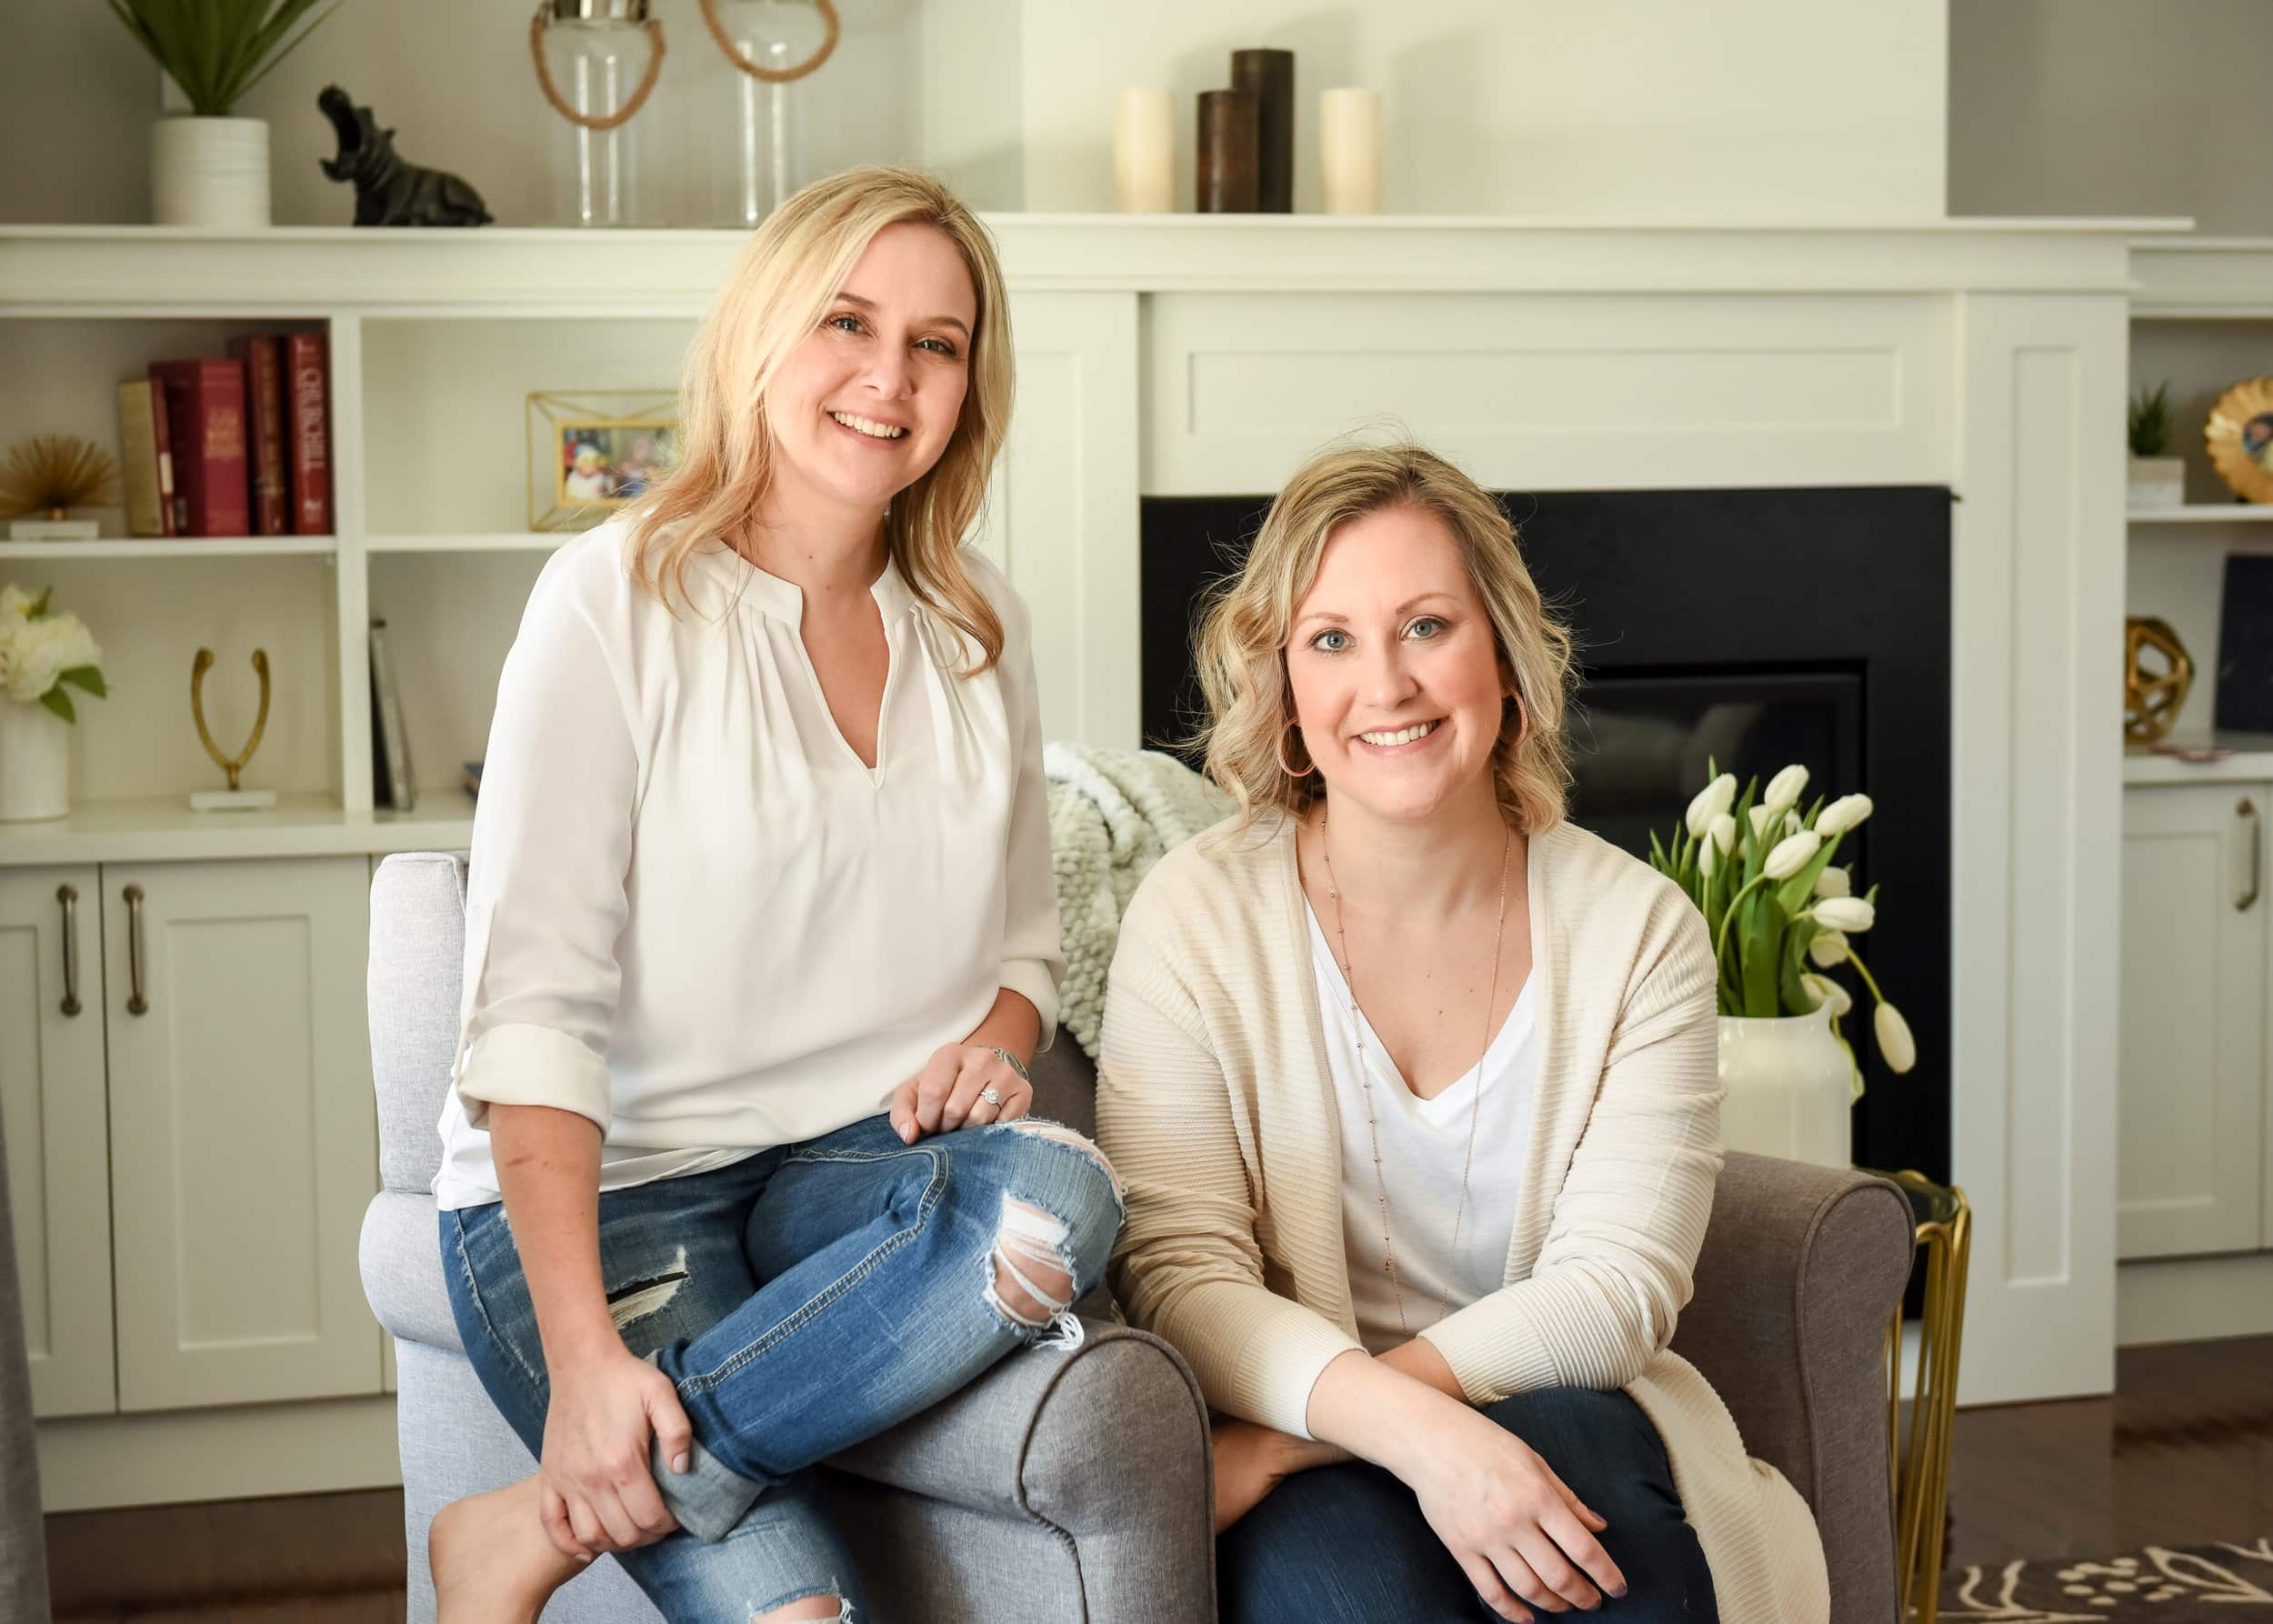 Two women sitting in a cozy living room, smiling at the camera - how to take personal branding photos for Instagram.